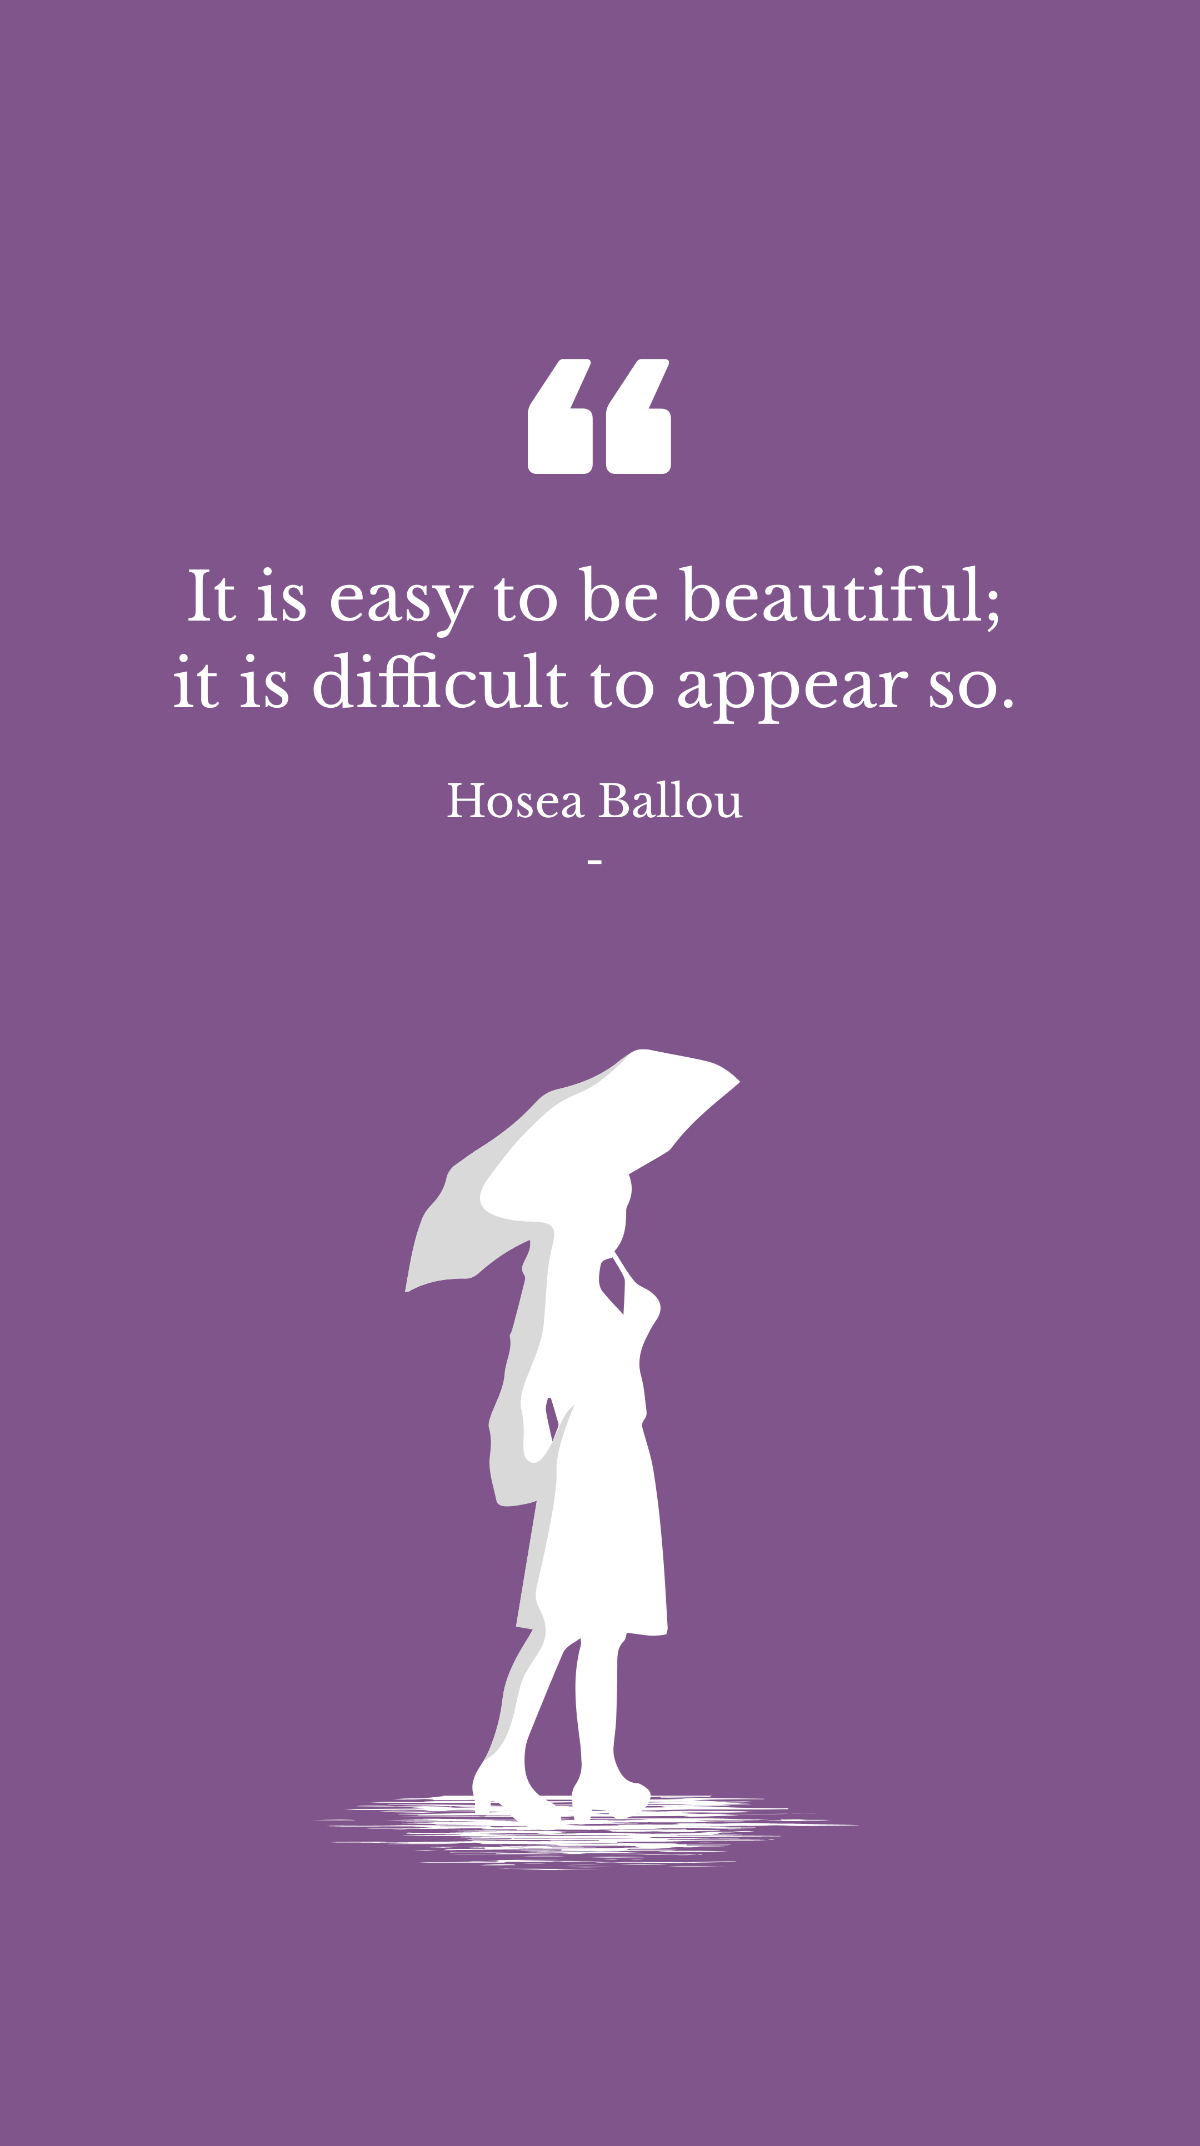 Hosea Ballou - It is easy to be beautiful; it is difficult to appear so. Template